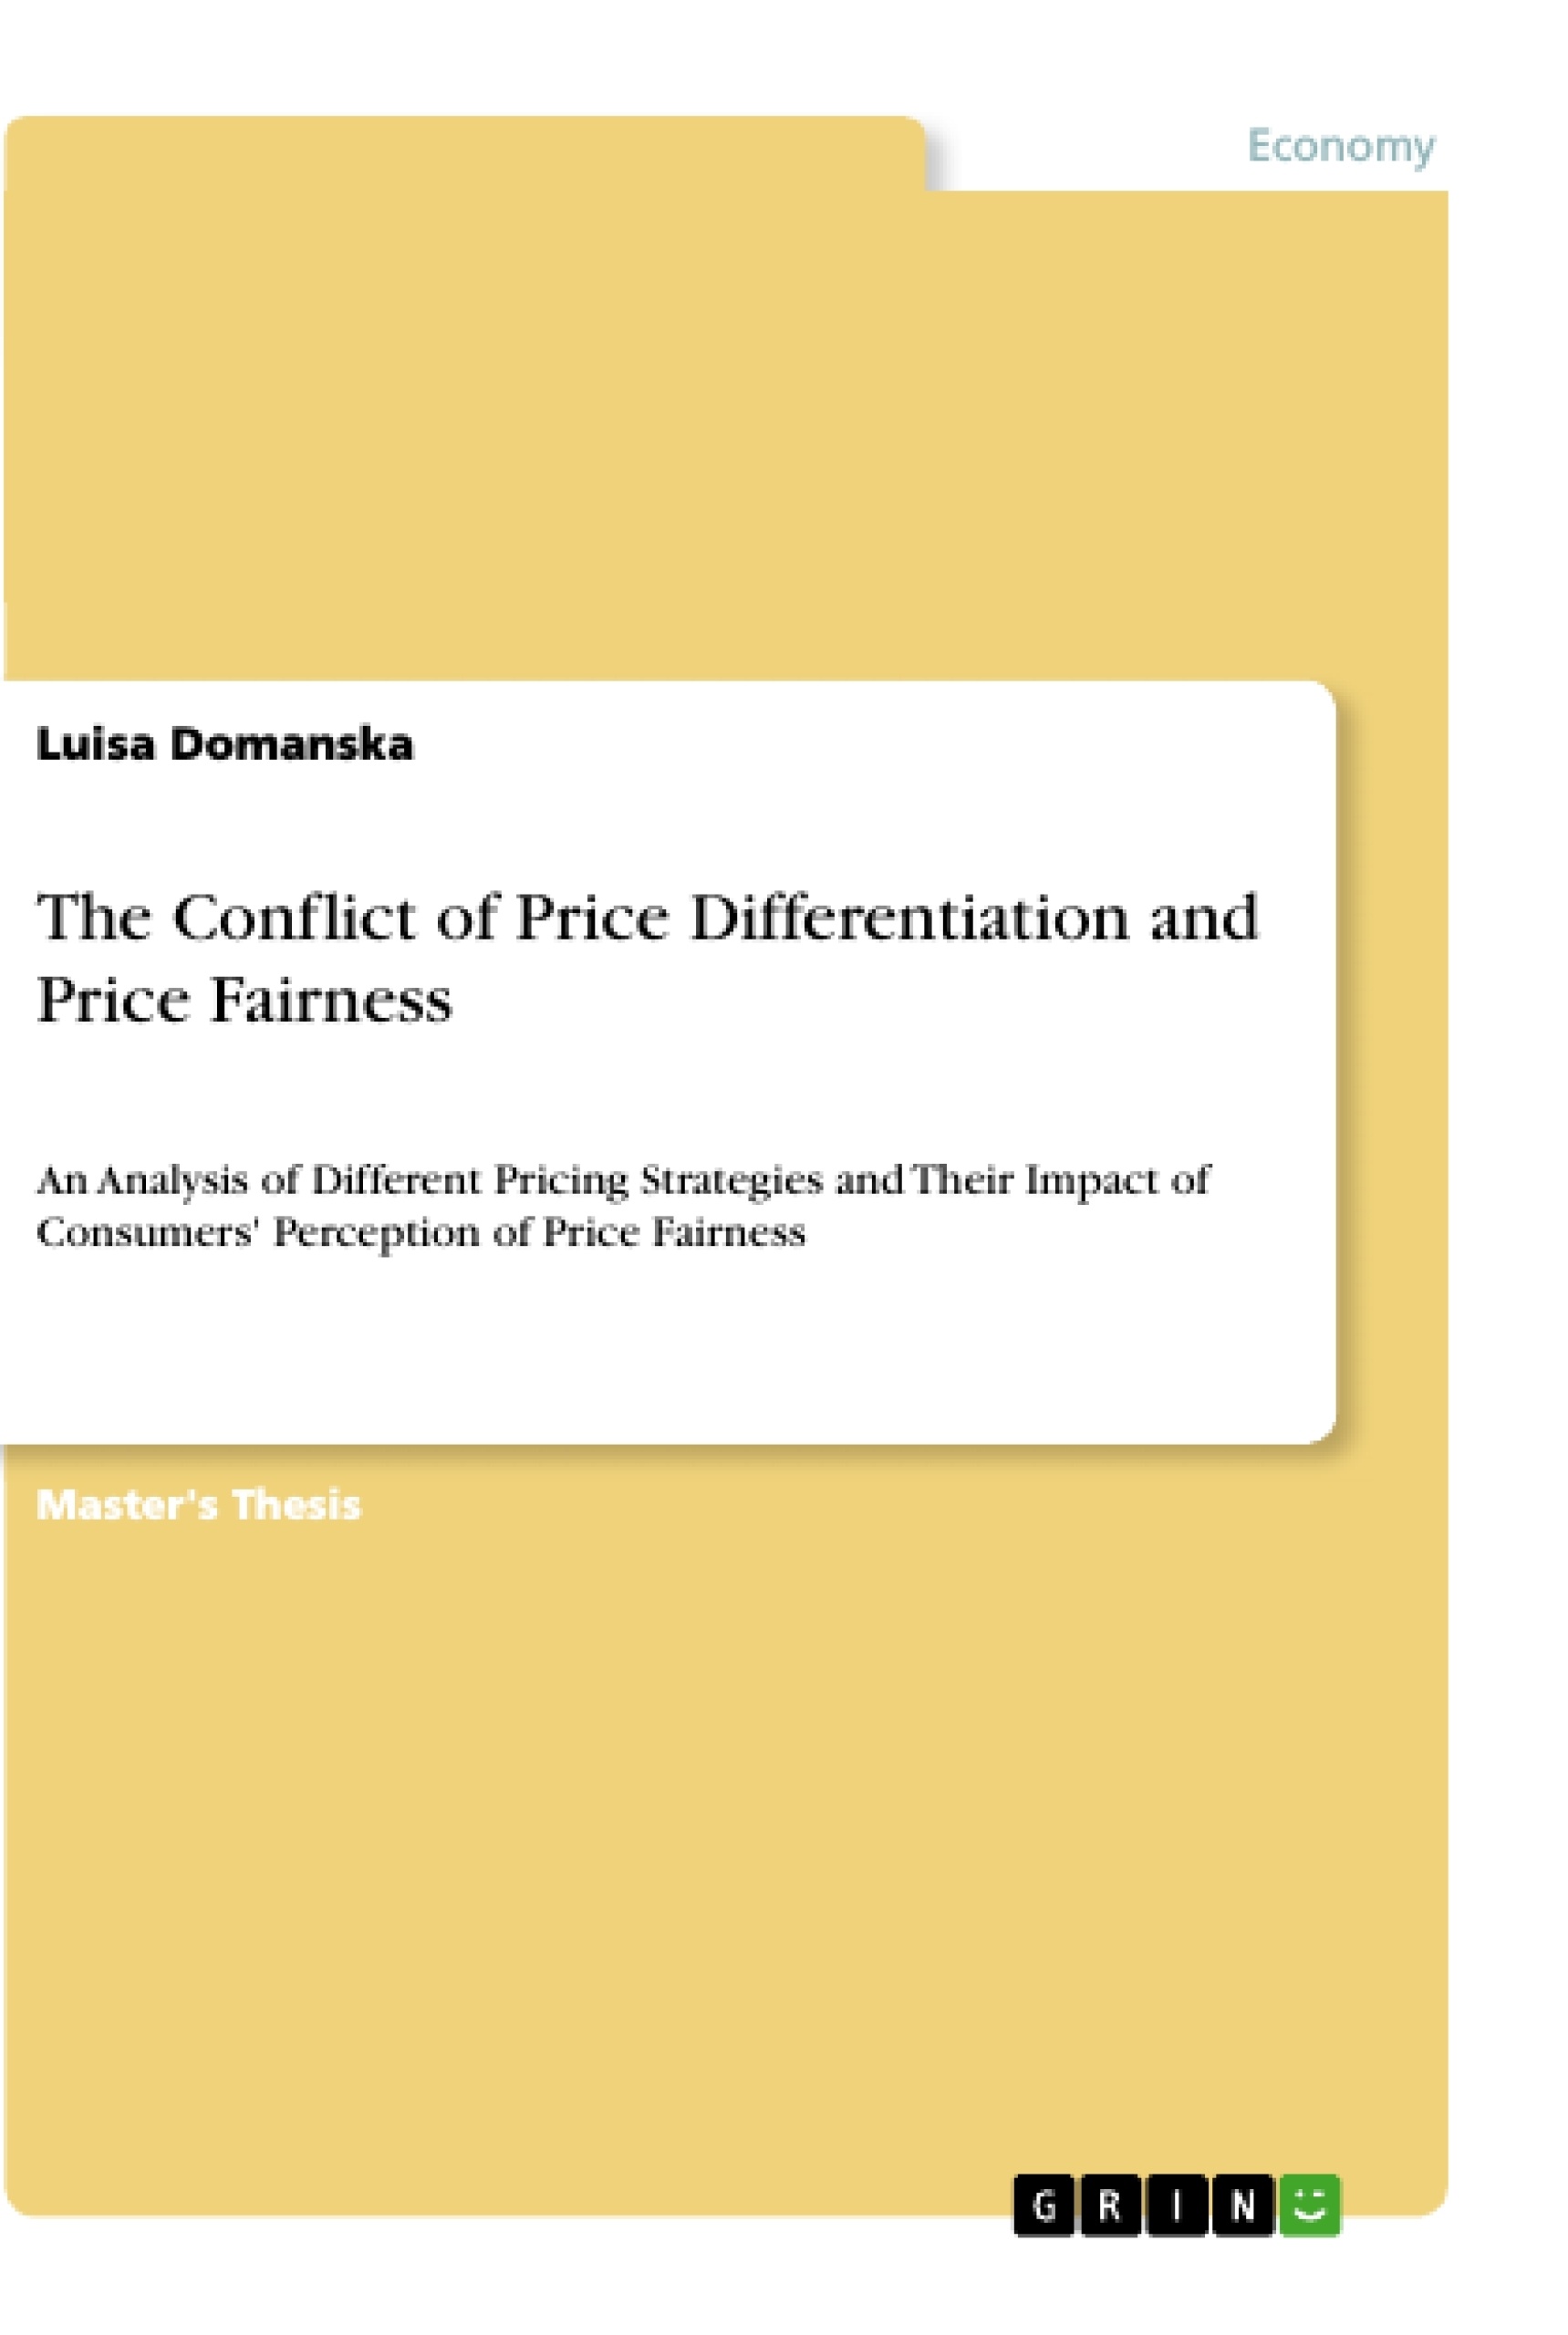 Título: The Conflict of Price Differentiation and Price Fairness